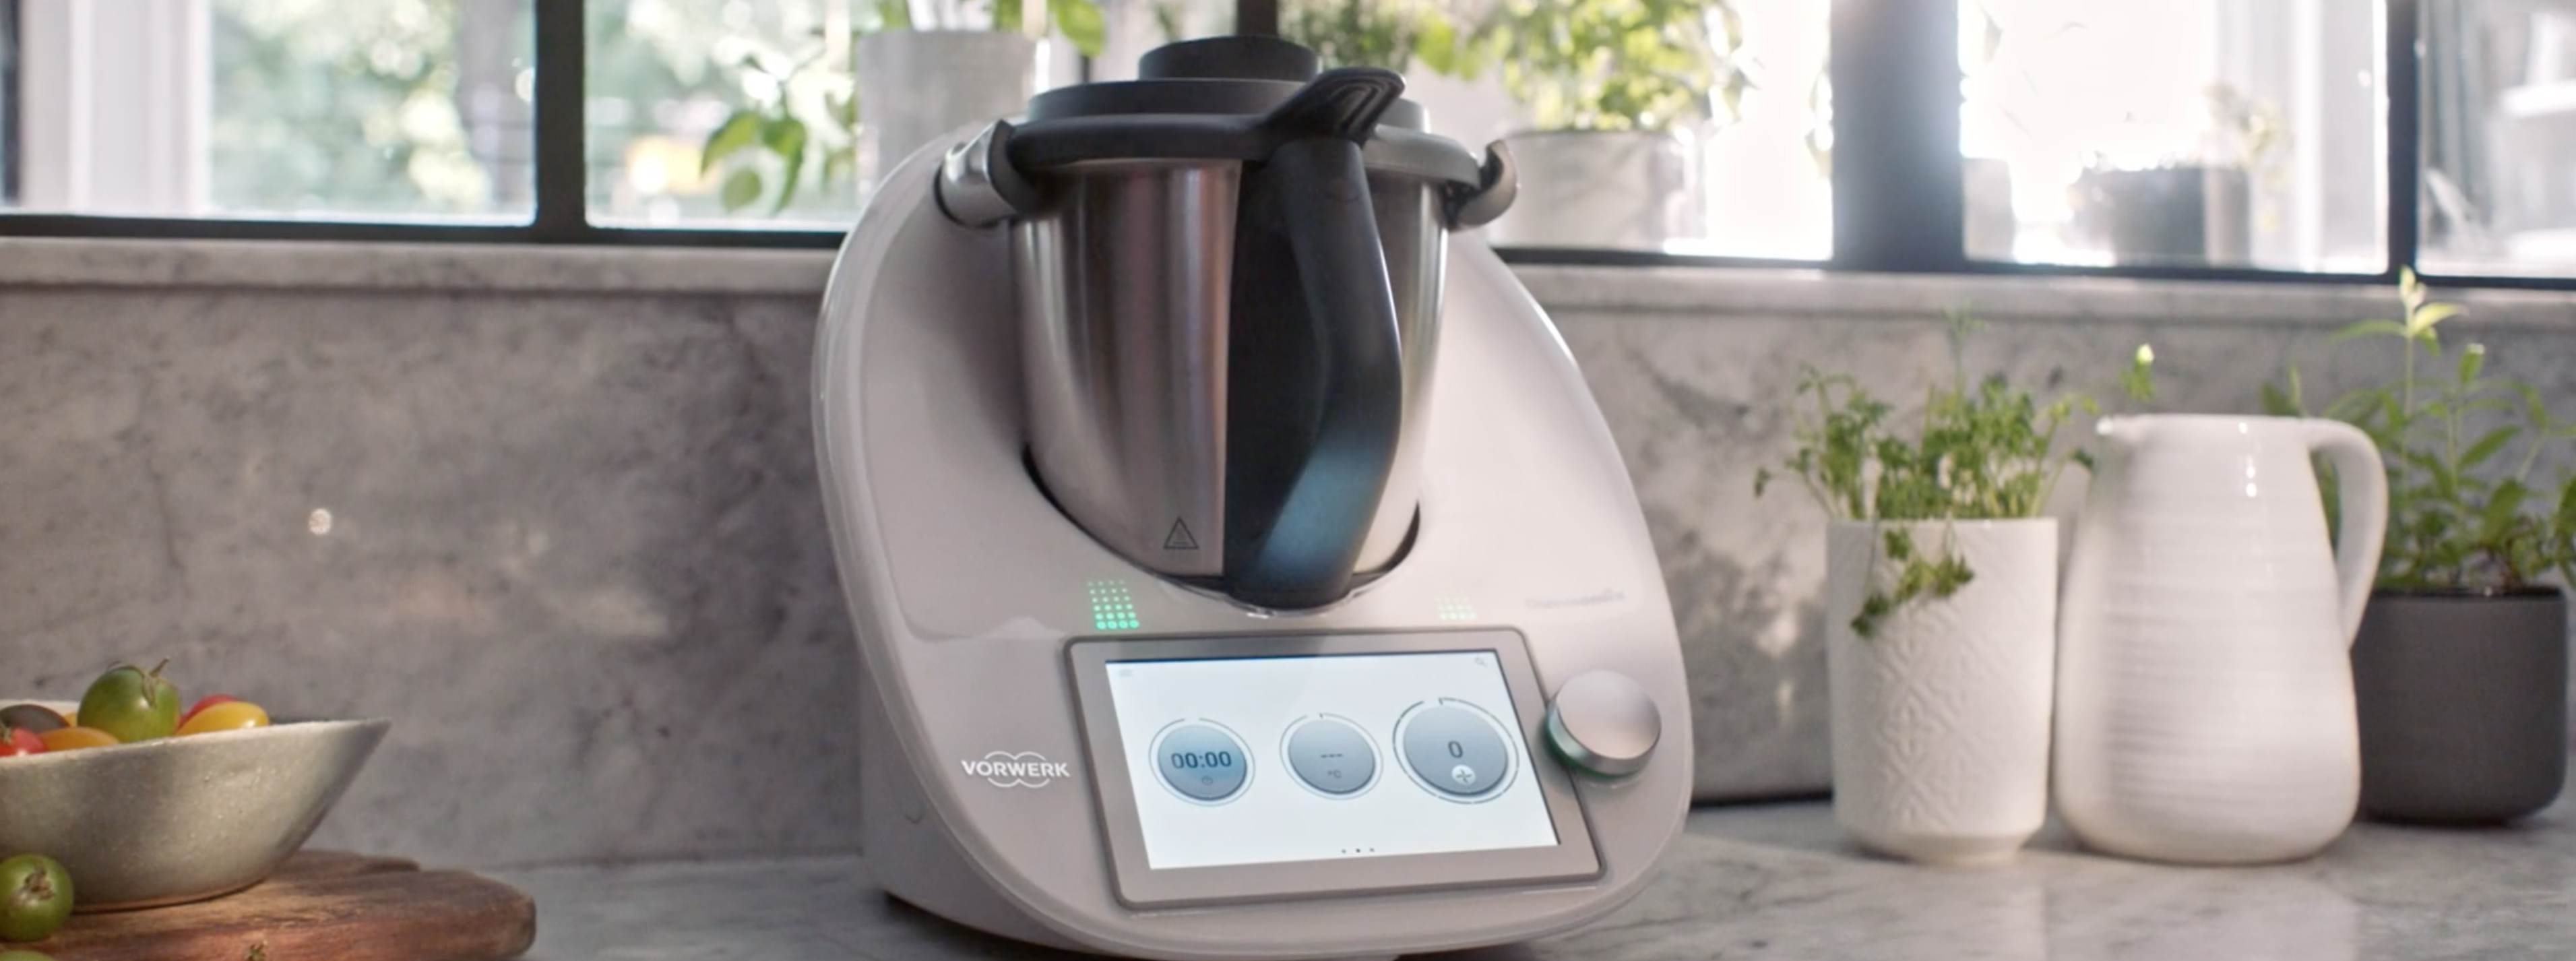 Meet the TM6, Thermomix's Latest Generation Do-Anything Cooking Appliance